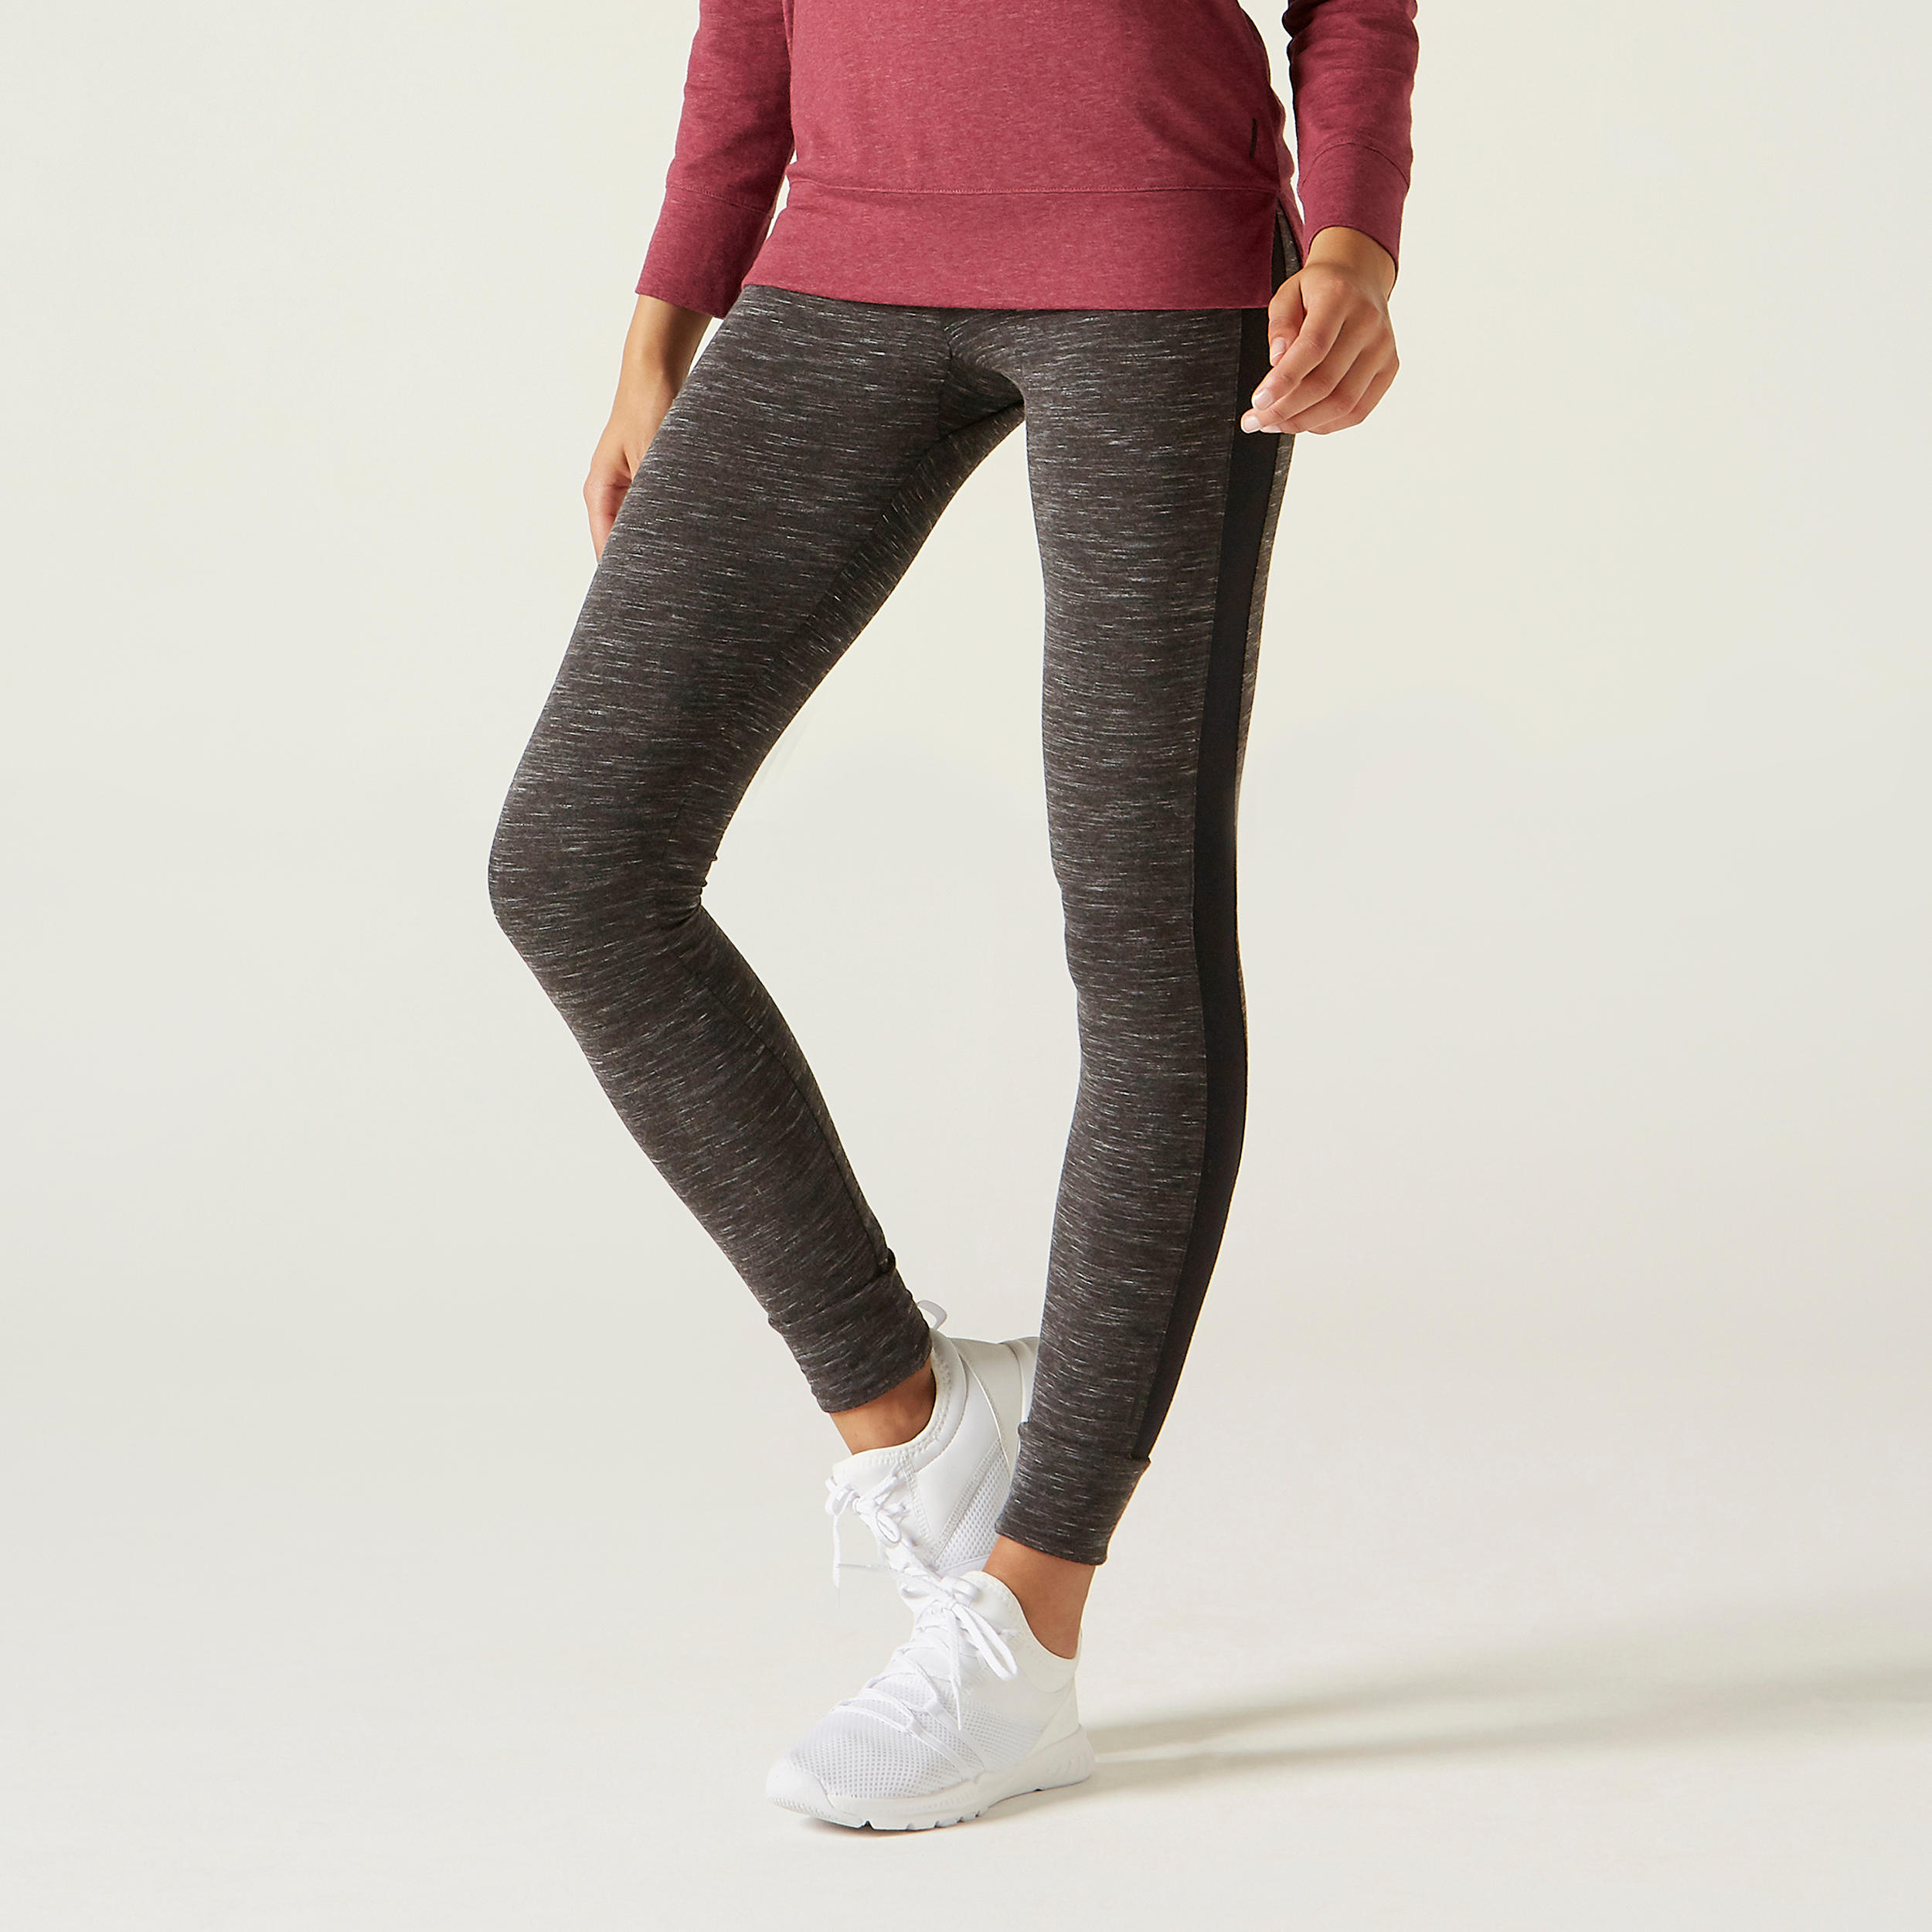 Buy Sports Bottoms for Women Online in South Africa | SUPERBALIST